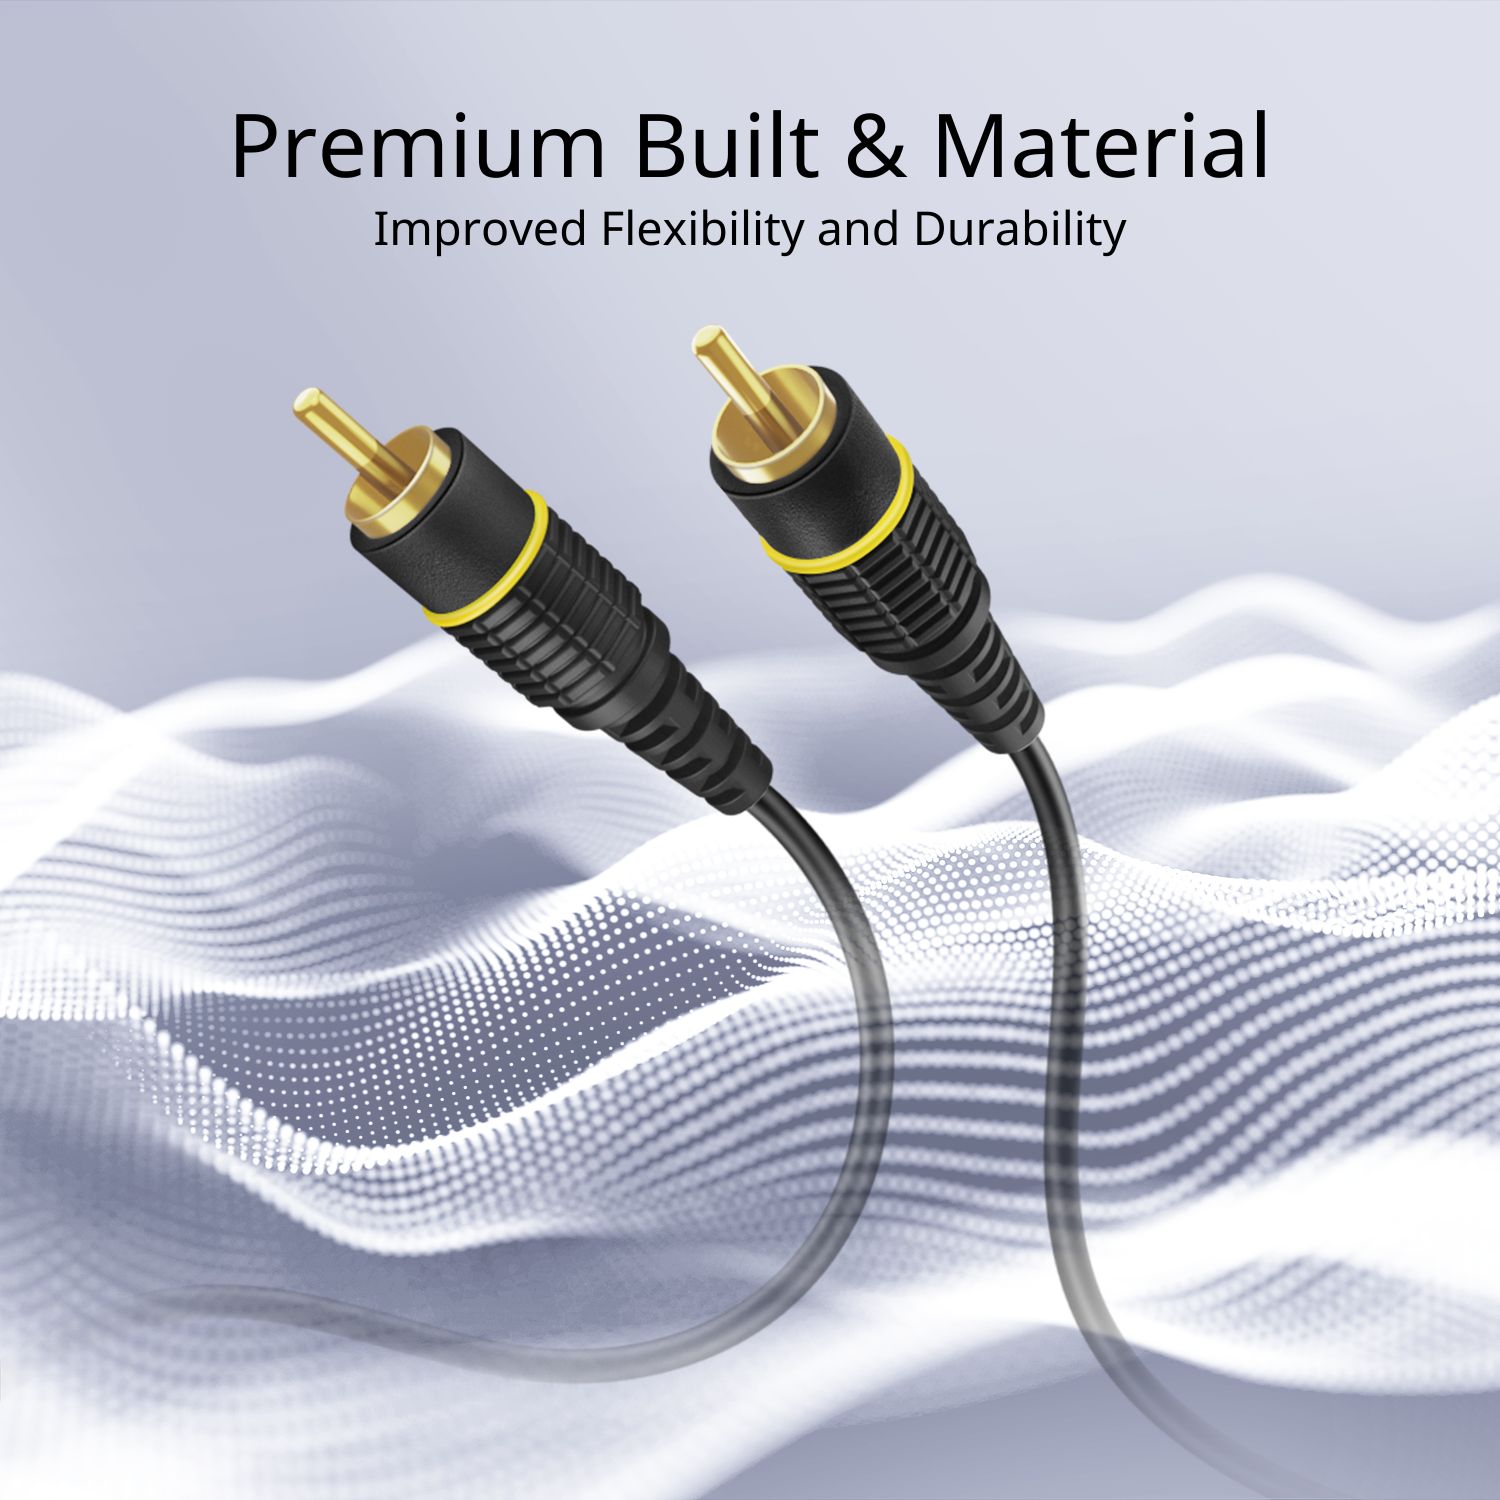 Subwoofer S/PDIF Audio Digital Coaxial RCA Composite Video Cable (15 Feet) - Gold Plated Dual Shielded RCA to RCA Male Connectors - Black - image 3 of 6